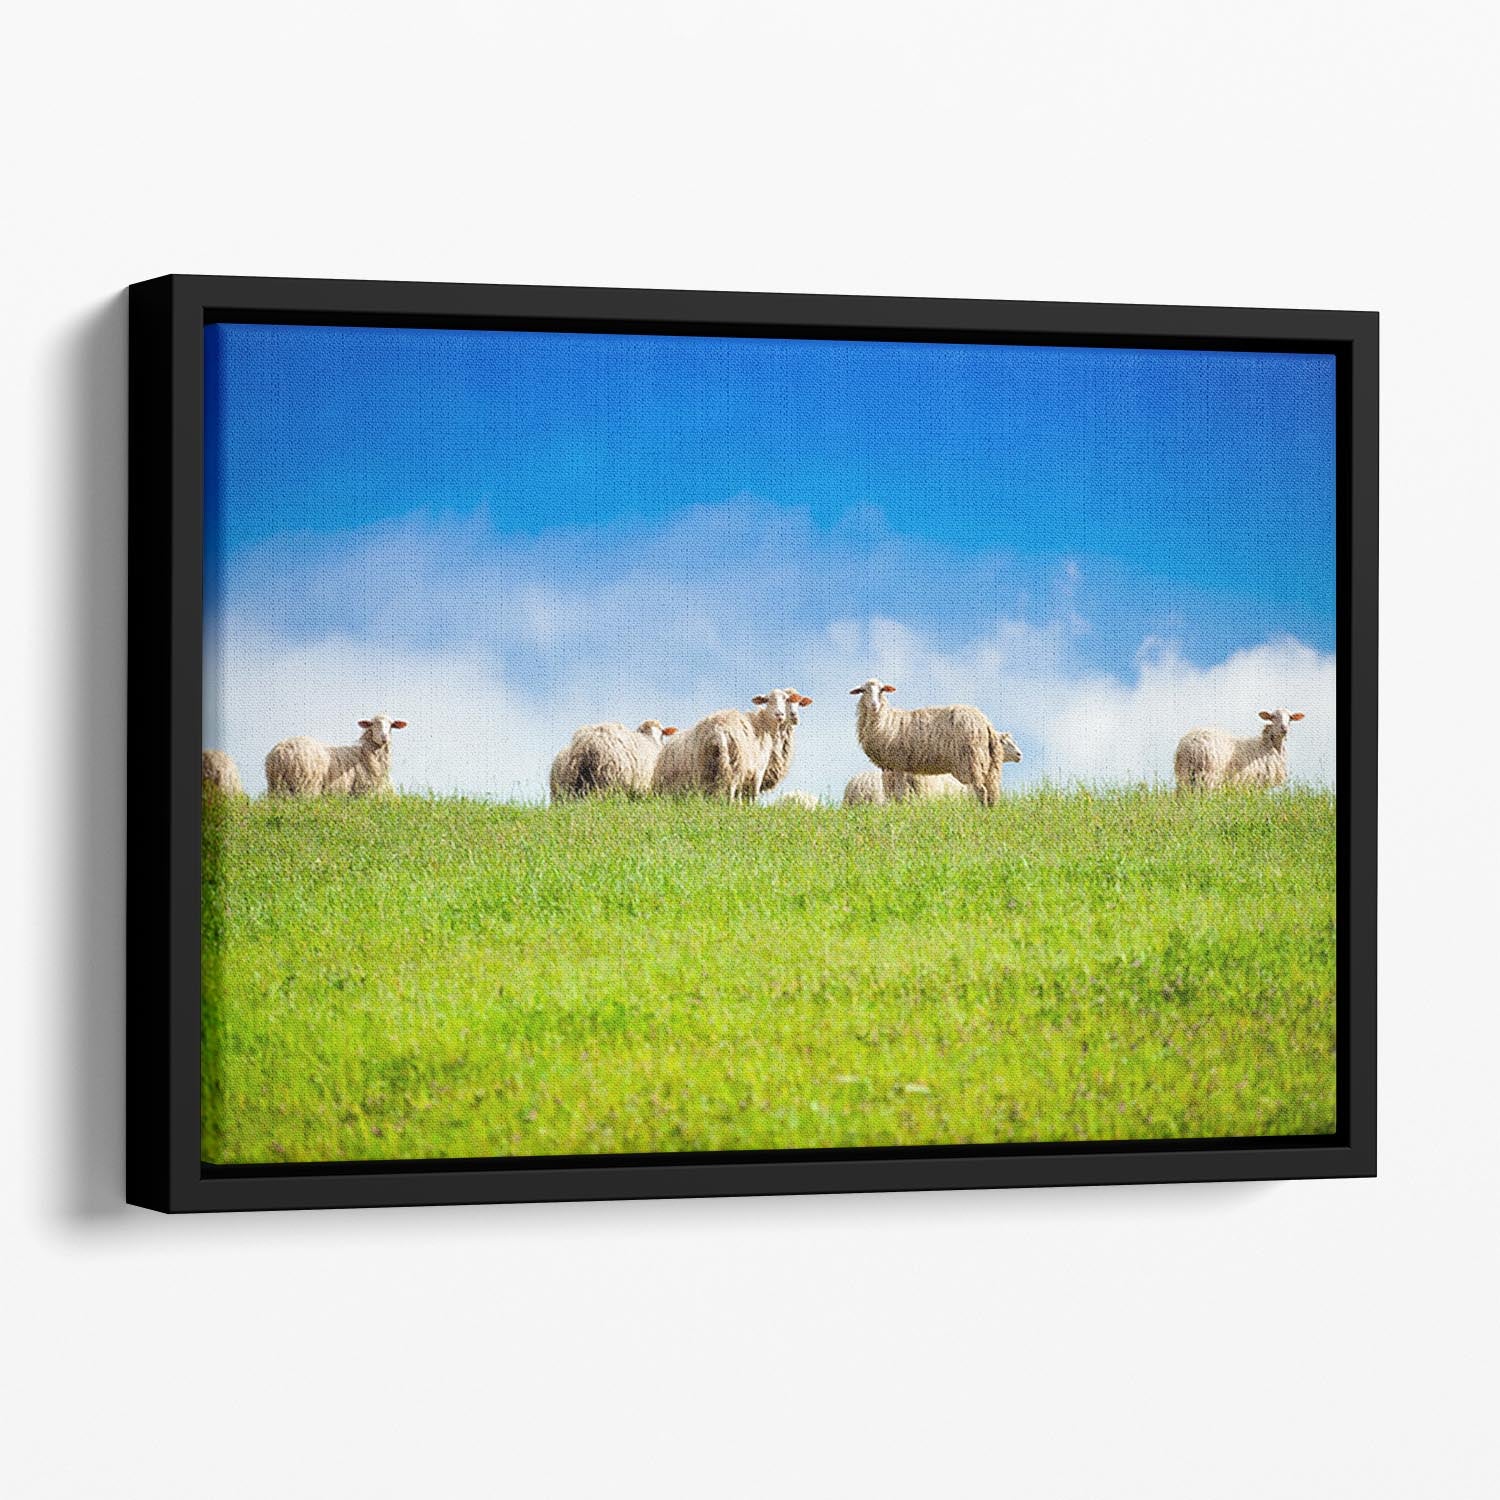 Two sheep looking at camera standing in herd Floating Framed Canvas - Canvas Art Rocks - 1